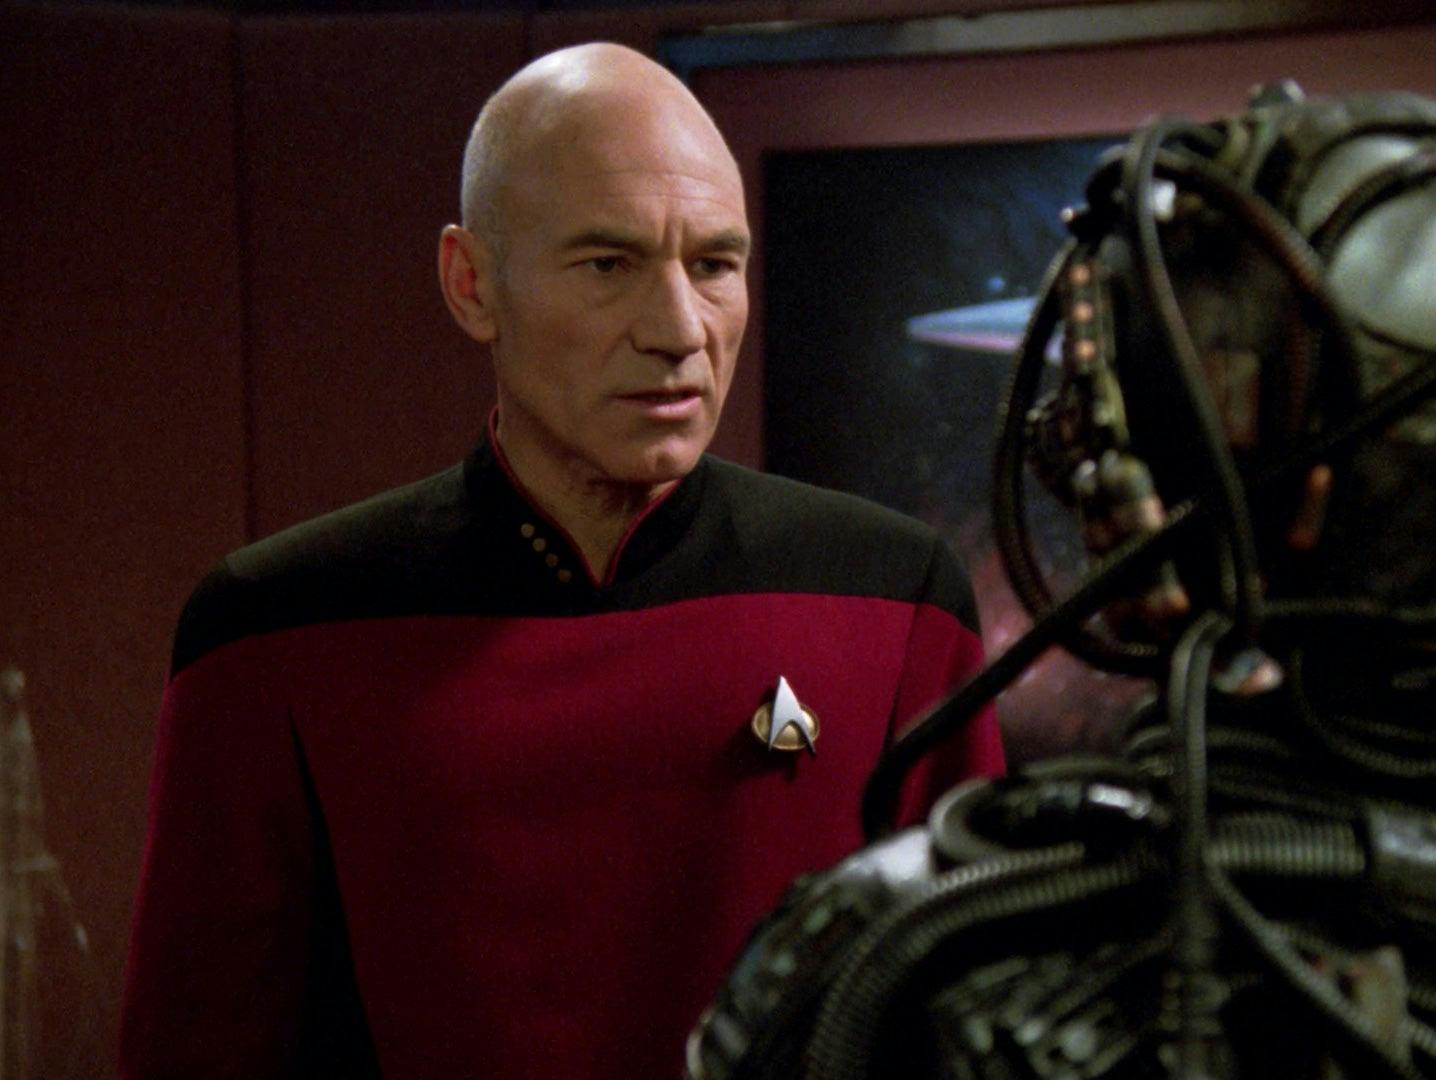 Picard faces the Borg drone Hugh with contempt in his Ready Room in 'I, Borg'